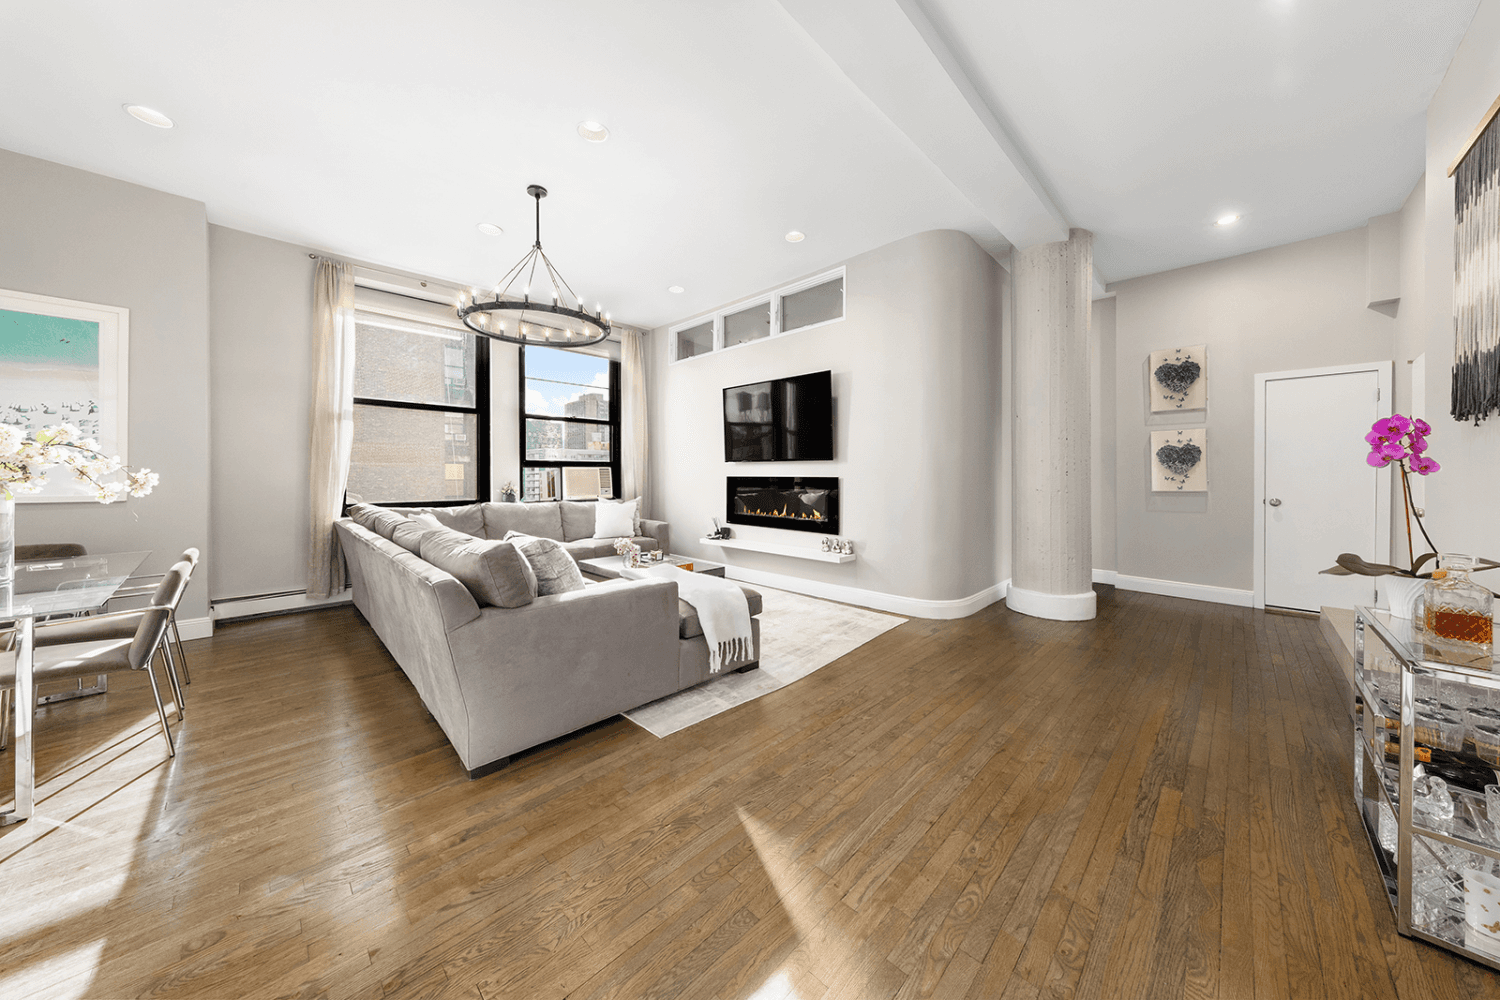 Sun Blasted Renovated One Bedroom Loft plus 2nd Bedroom Home Office Den with High Ceilings at the Full Service 250 Mercer Street in Noho Greenwich VillageWelcome to this exceptional renovated ...